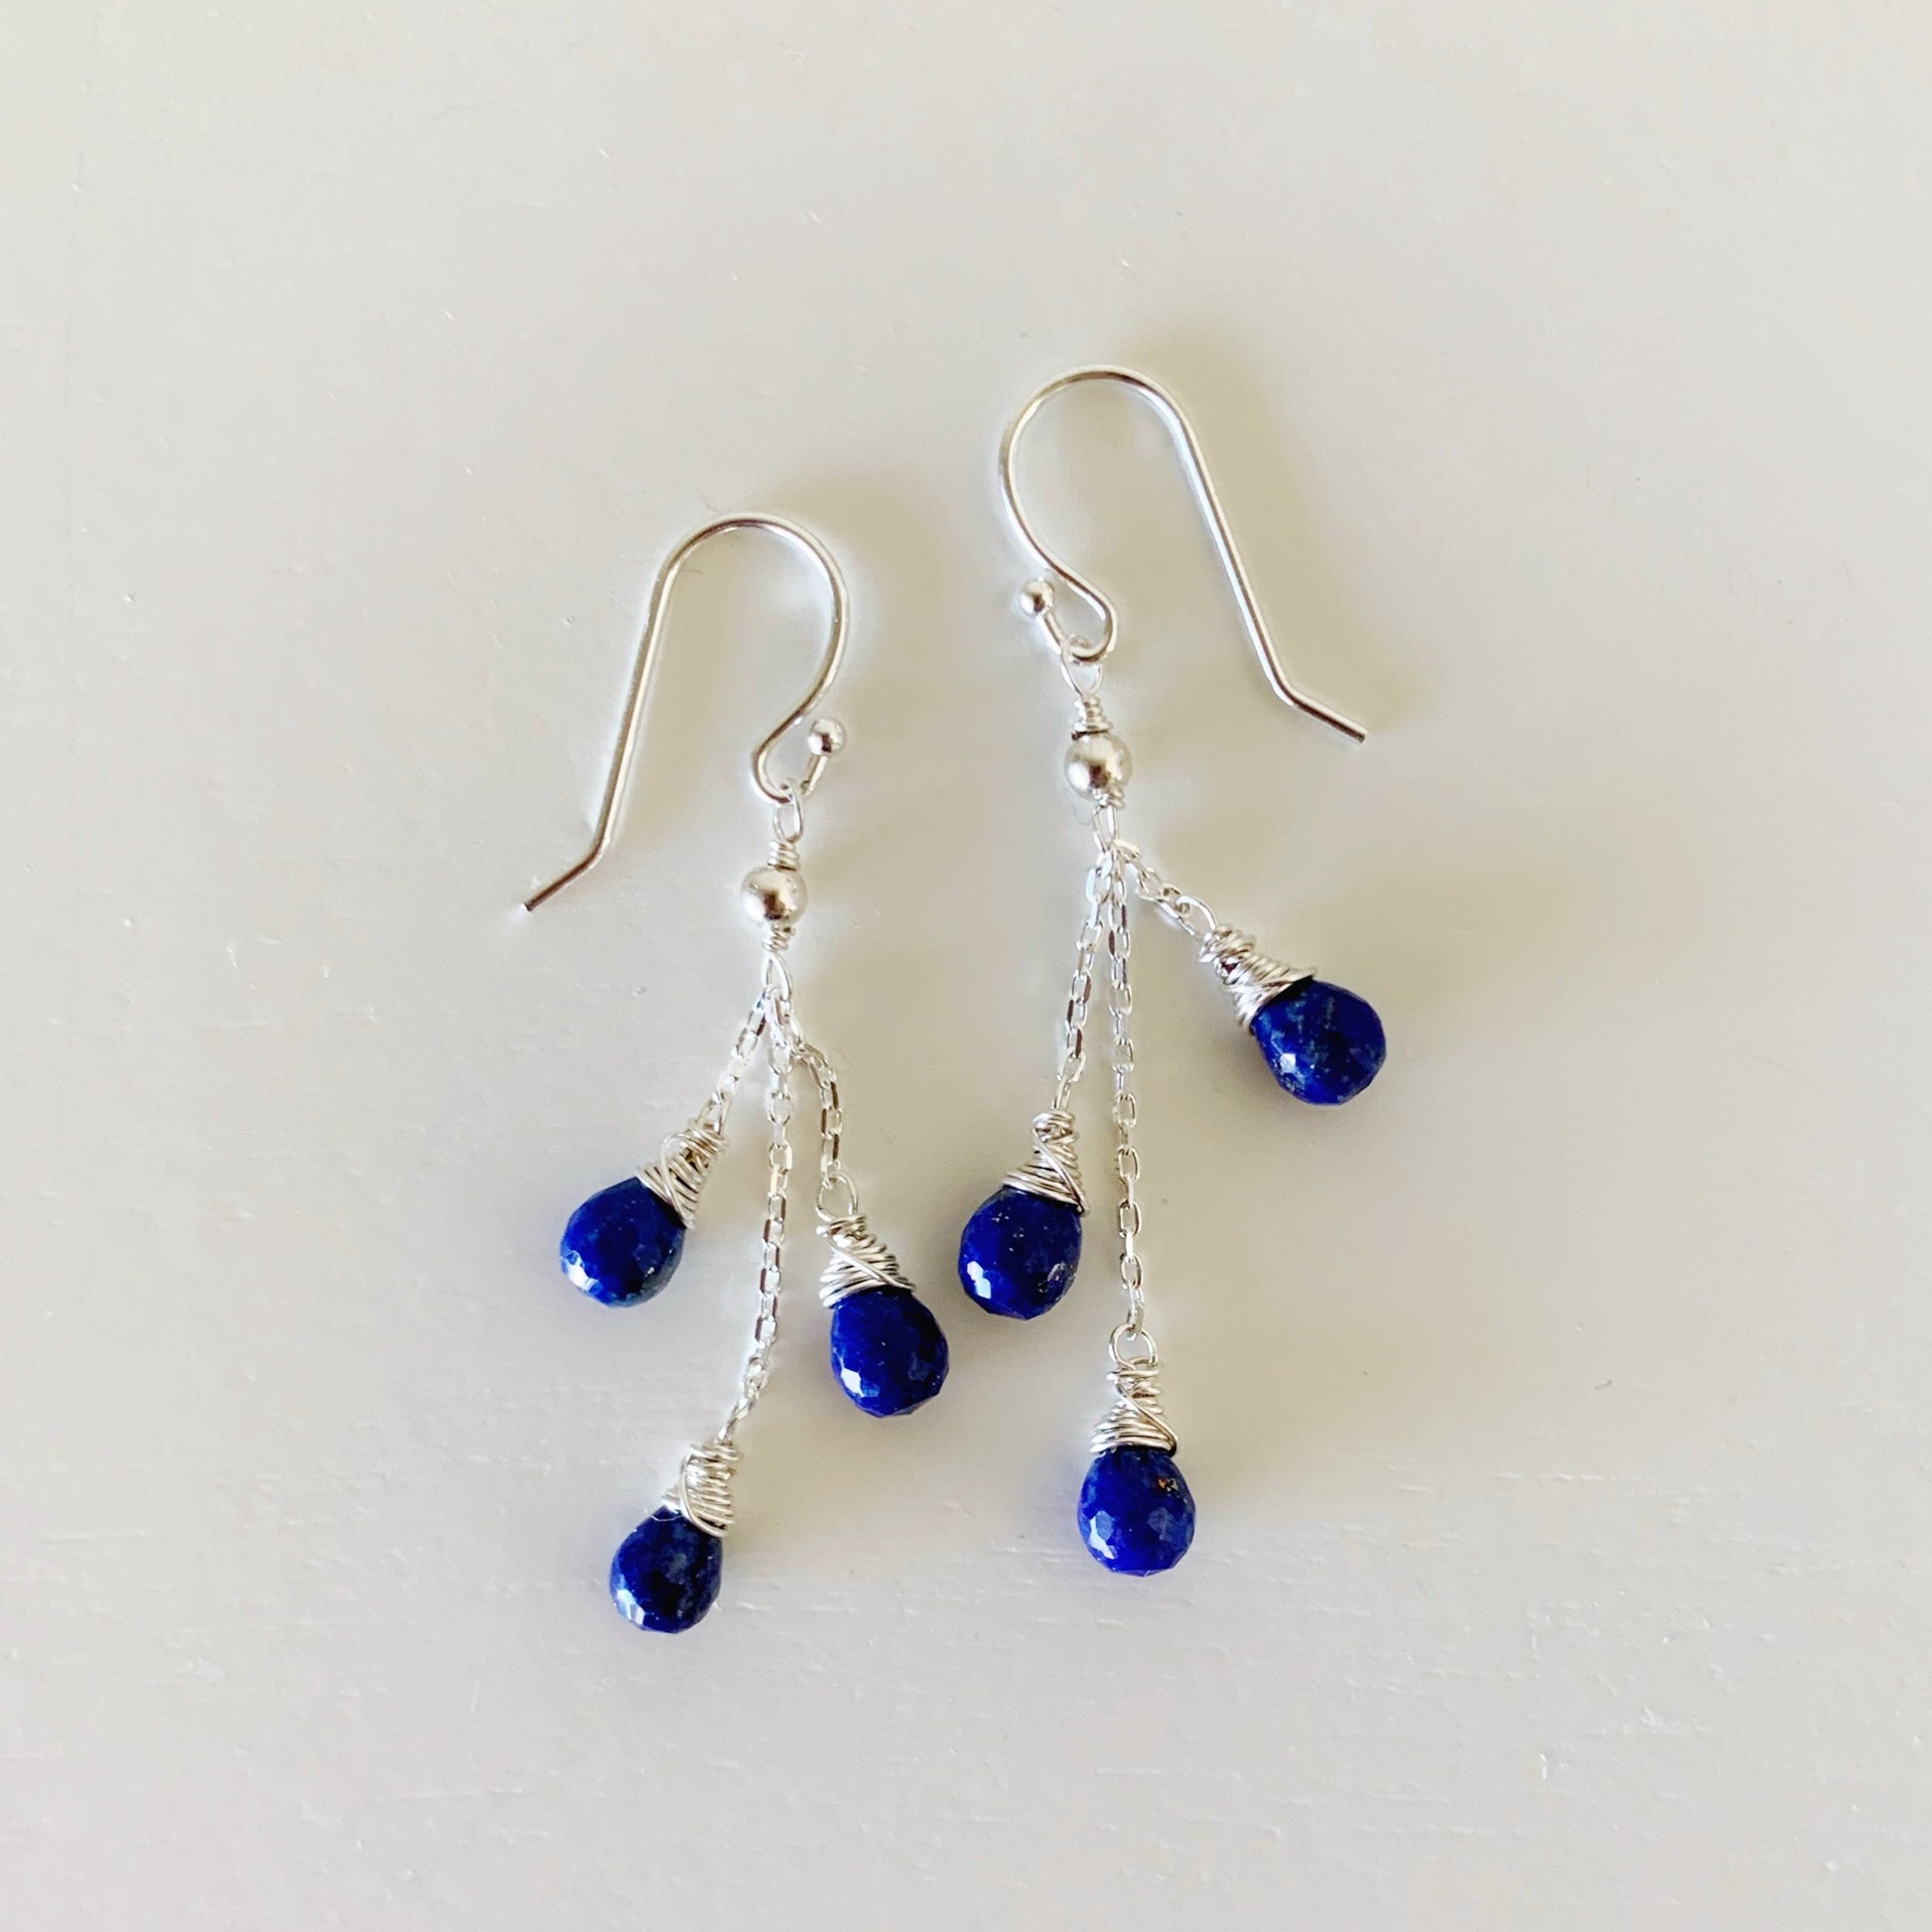 the neptune earrings by mermaids and madeleines are an eclectic style of earrings. these have three strands of sterling silver strands hanging from the earring hook with a royal blue lapis teardrop bead suspended from the bottom of each chain. this pair is photographed with the strands spread out and flat on a white surface